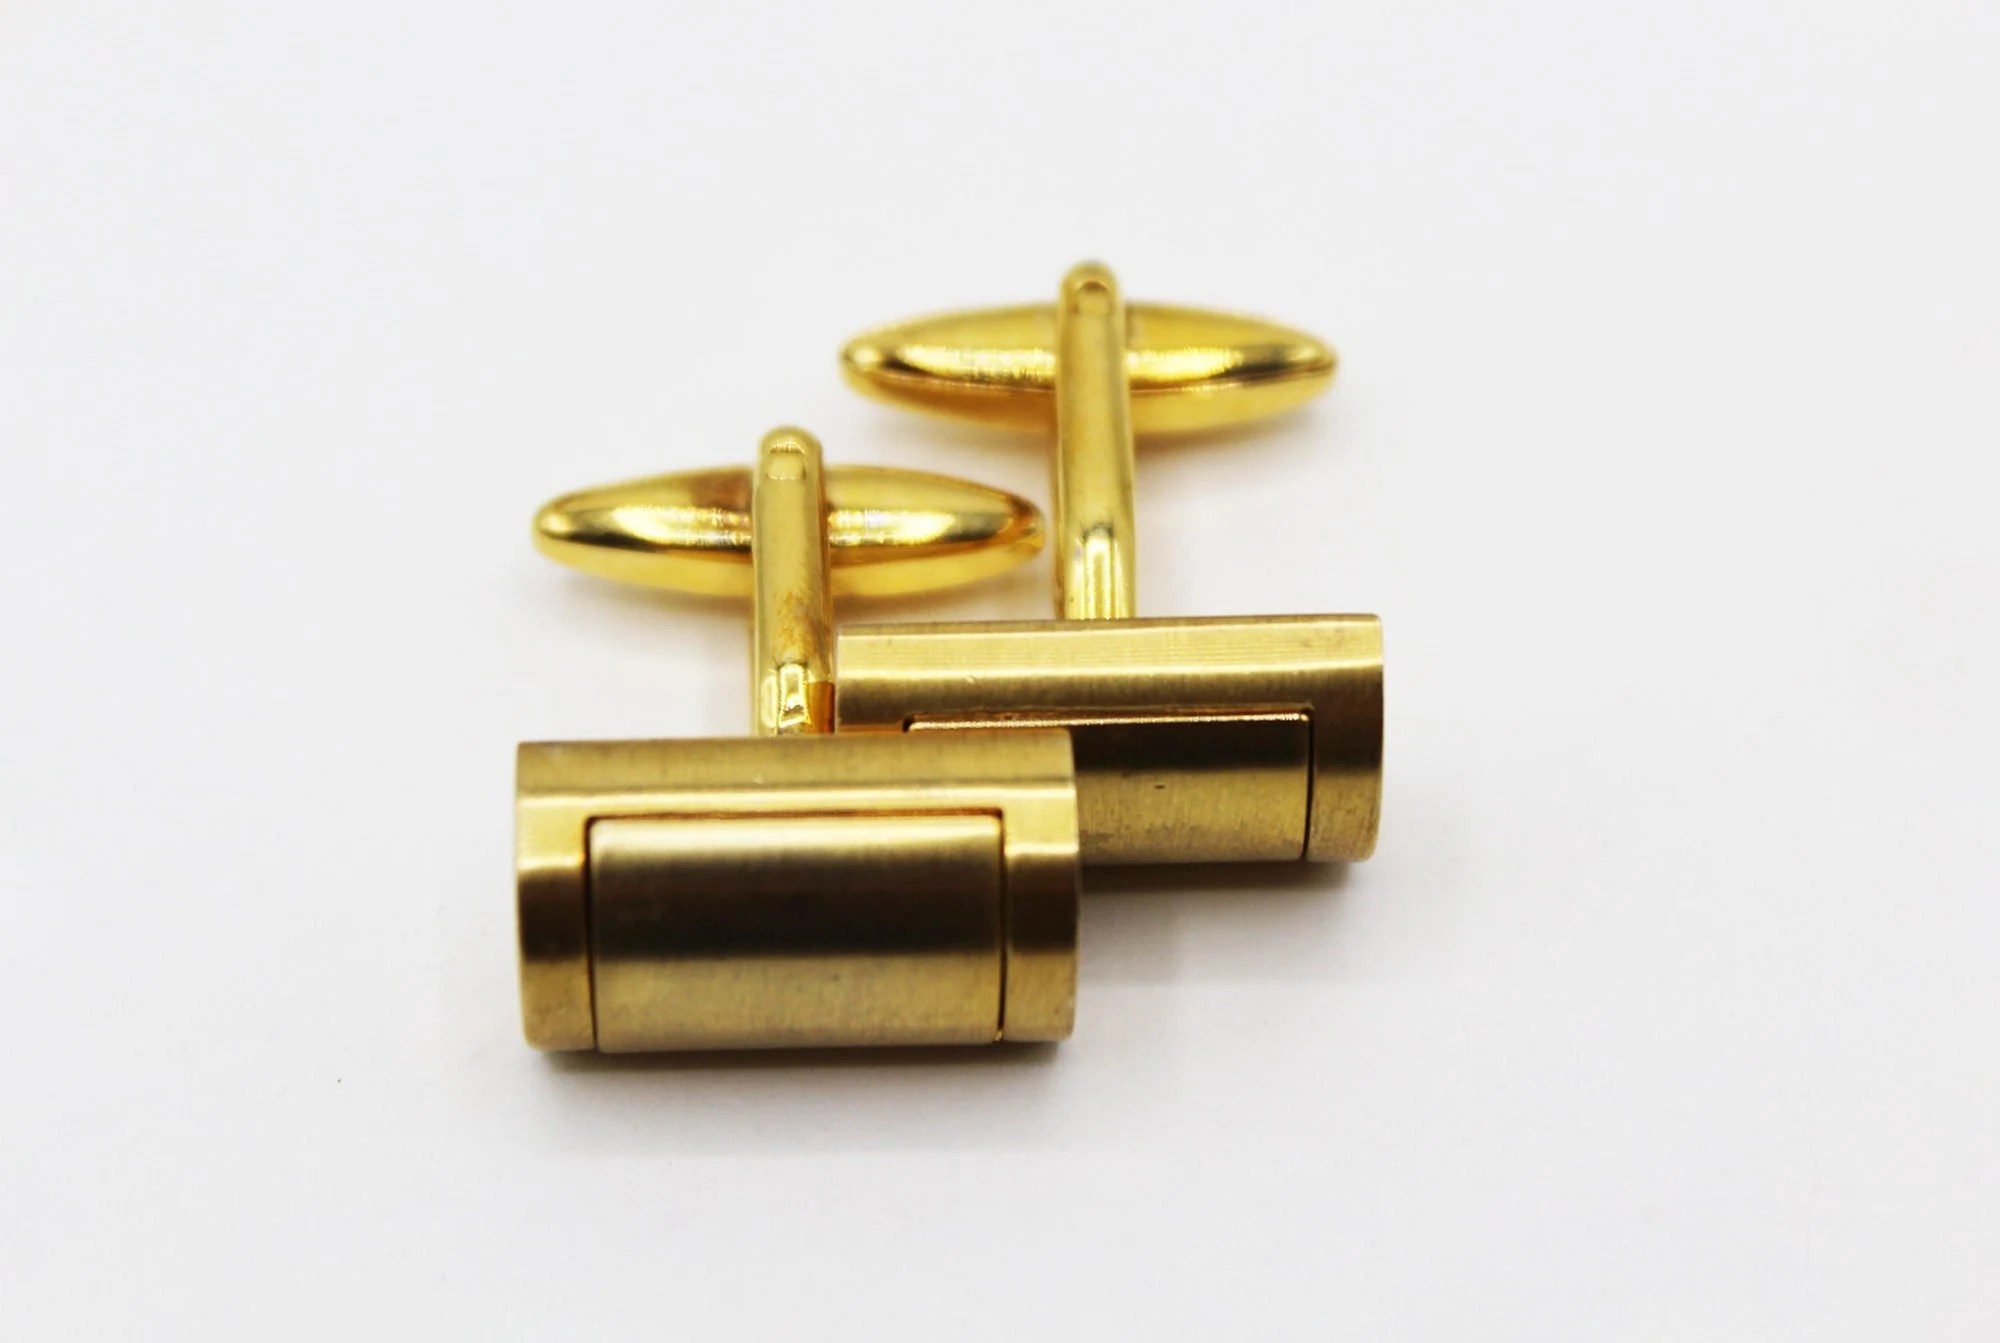 Matte Gold Tone Cylinder Mens Cufflinks - Vintage, MCM, Mid Century, Retro, Classic, Business, Office, Wedding, Gifts for Men, Cuff Links